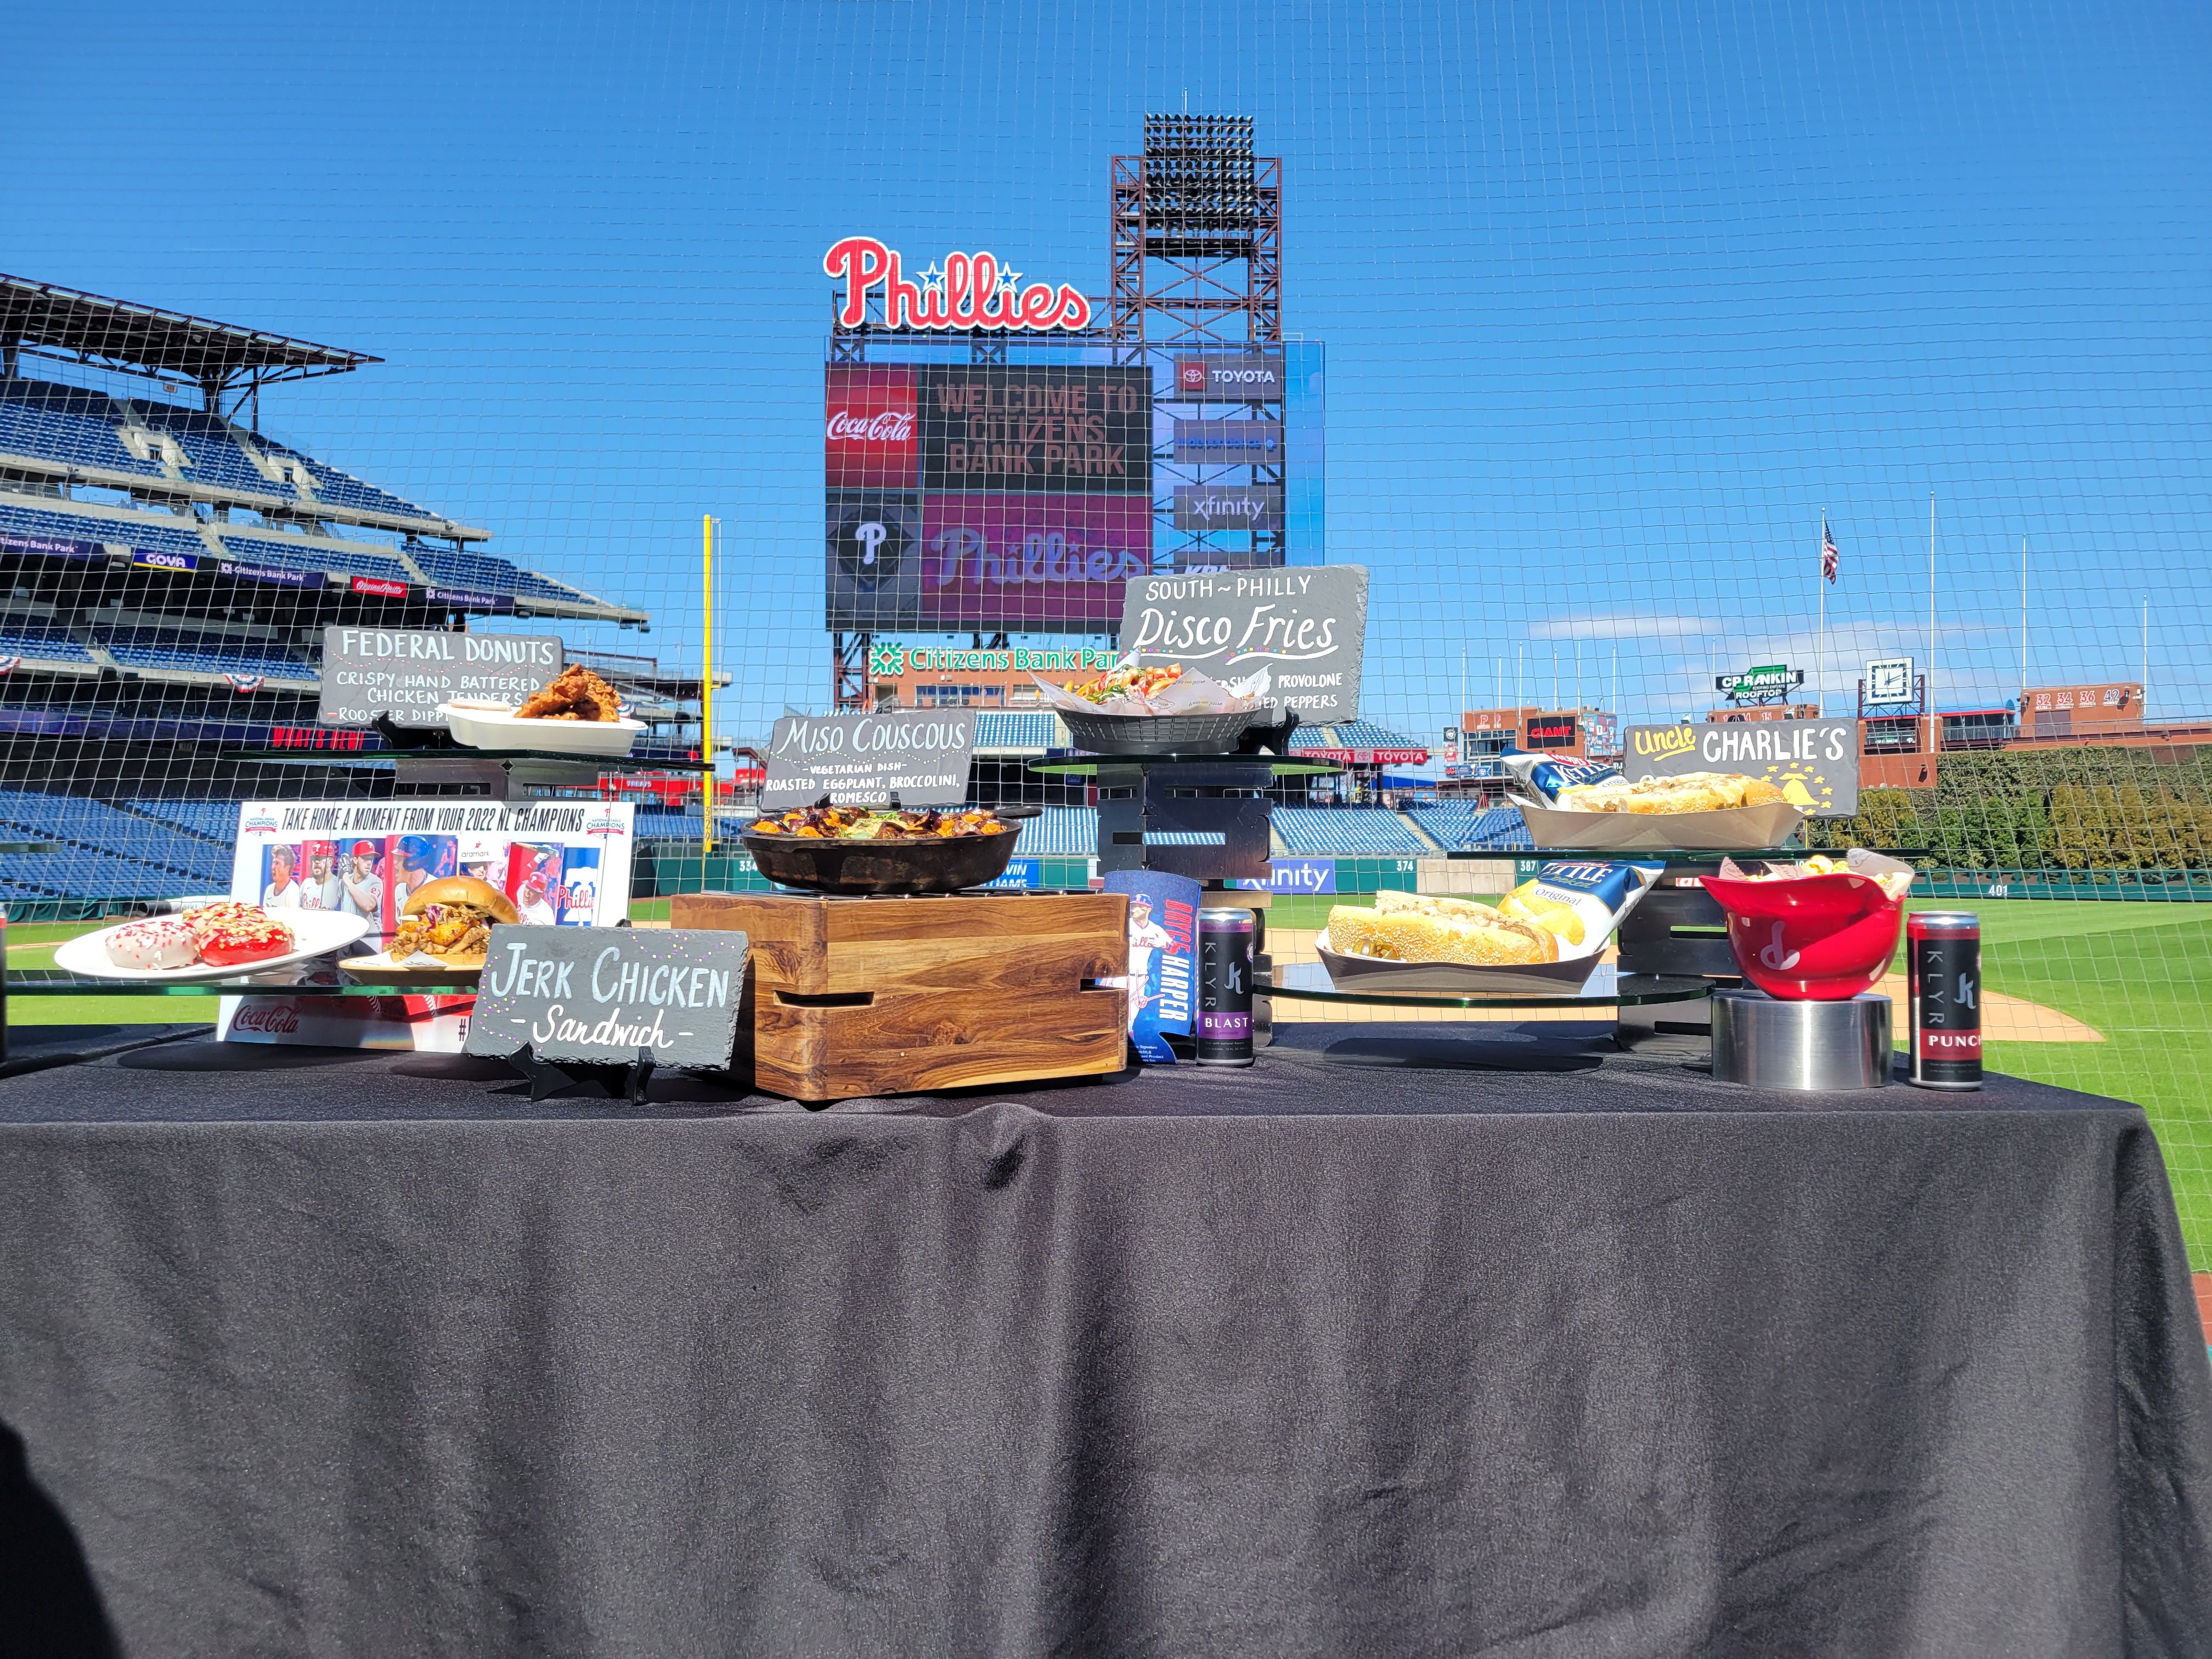 Phillies opening day: What to expect at Citizens Bank Park - Axios